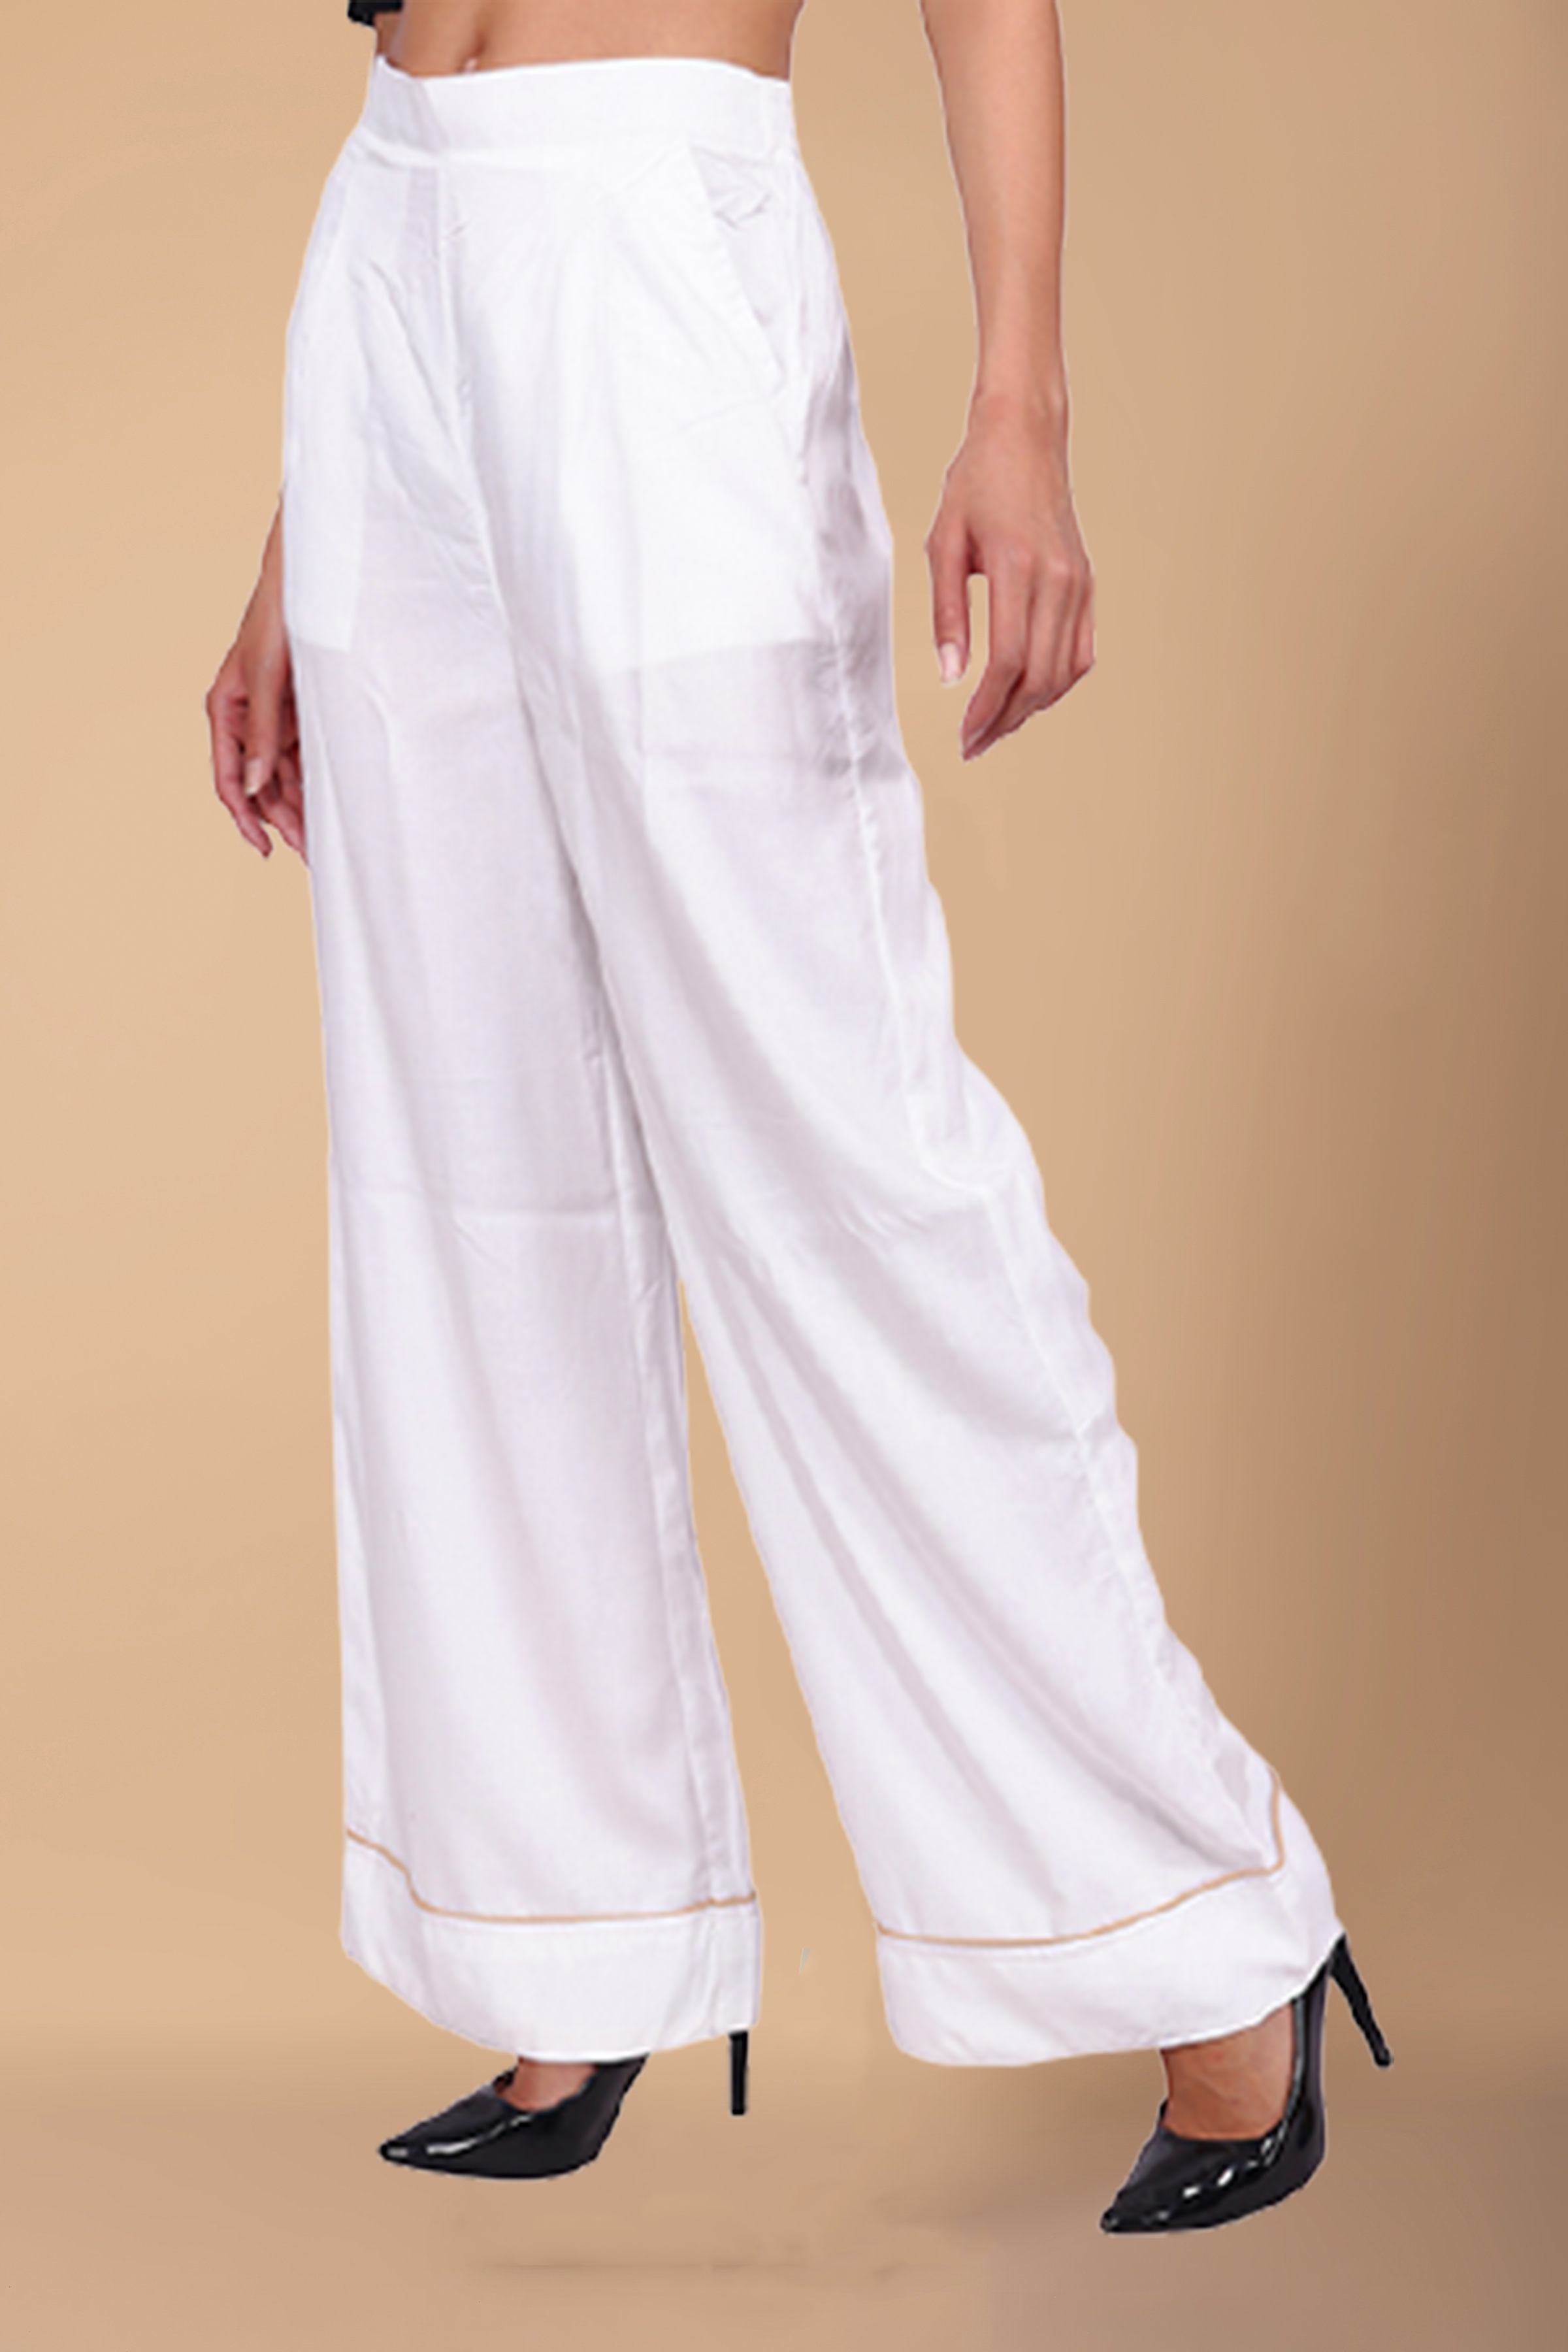 22 Best White Wide Leg Pants ideas | fashion outfits, clothes, outfits